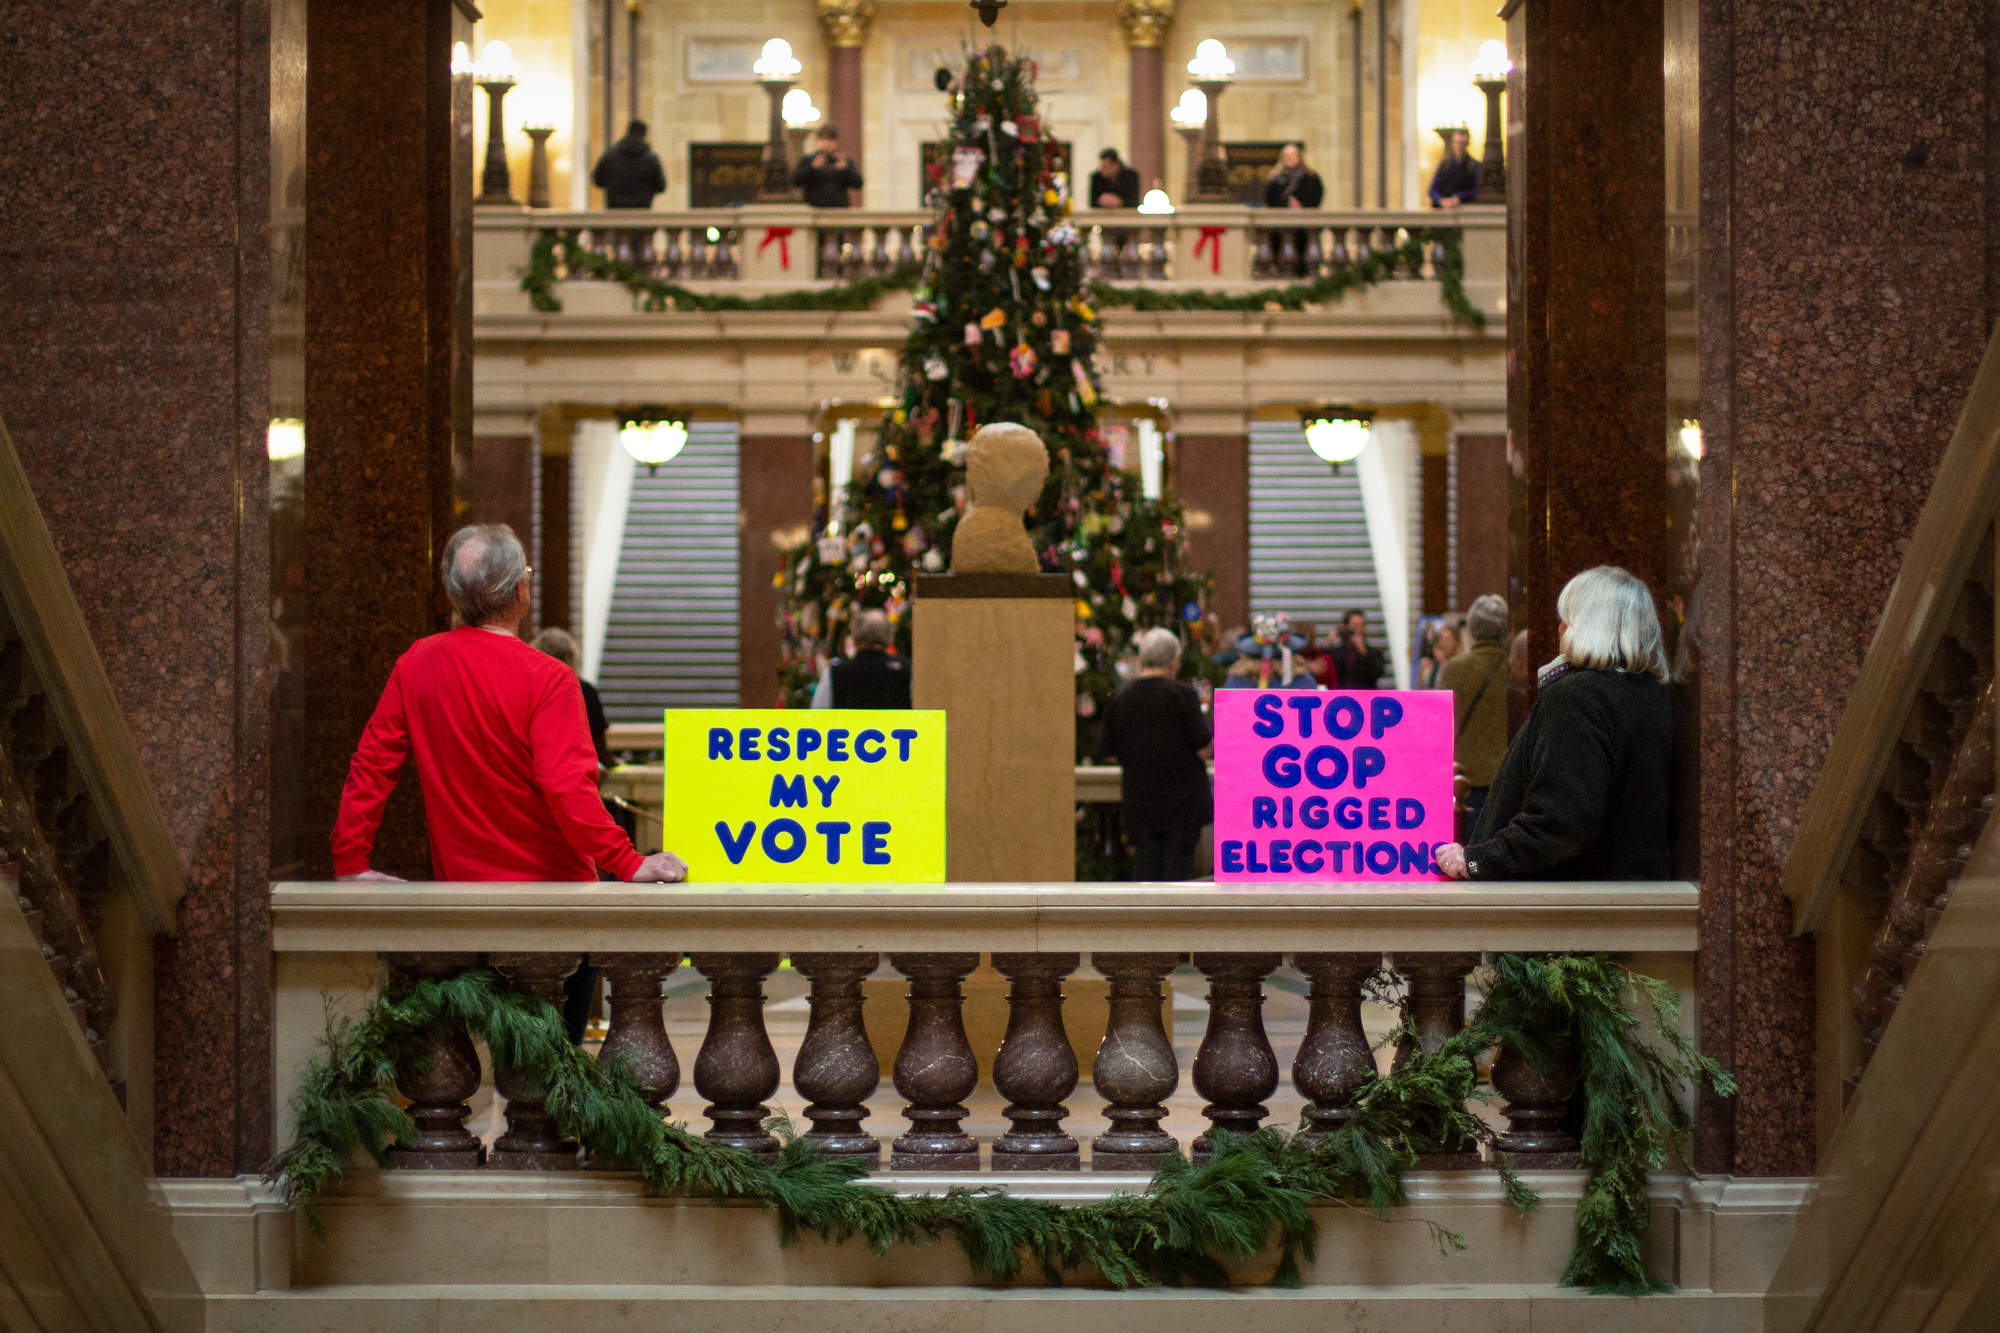 Public citizens hold up signs inside the Capitol calling for Republican lawmakers to respect their votes